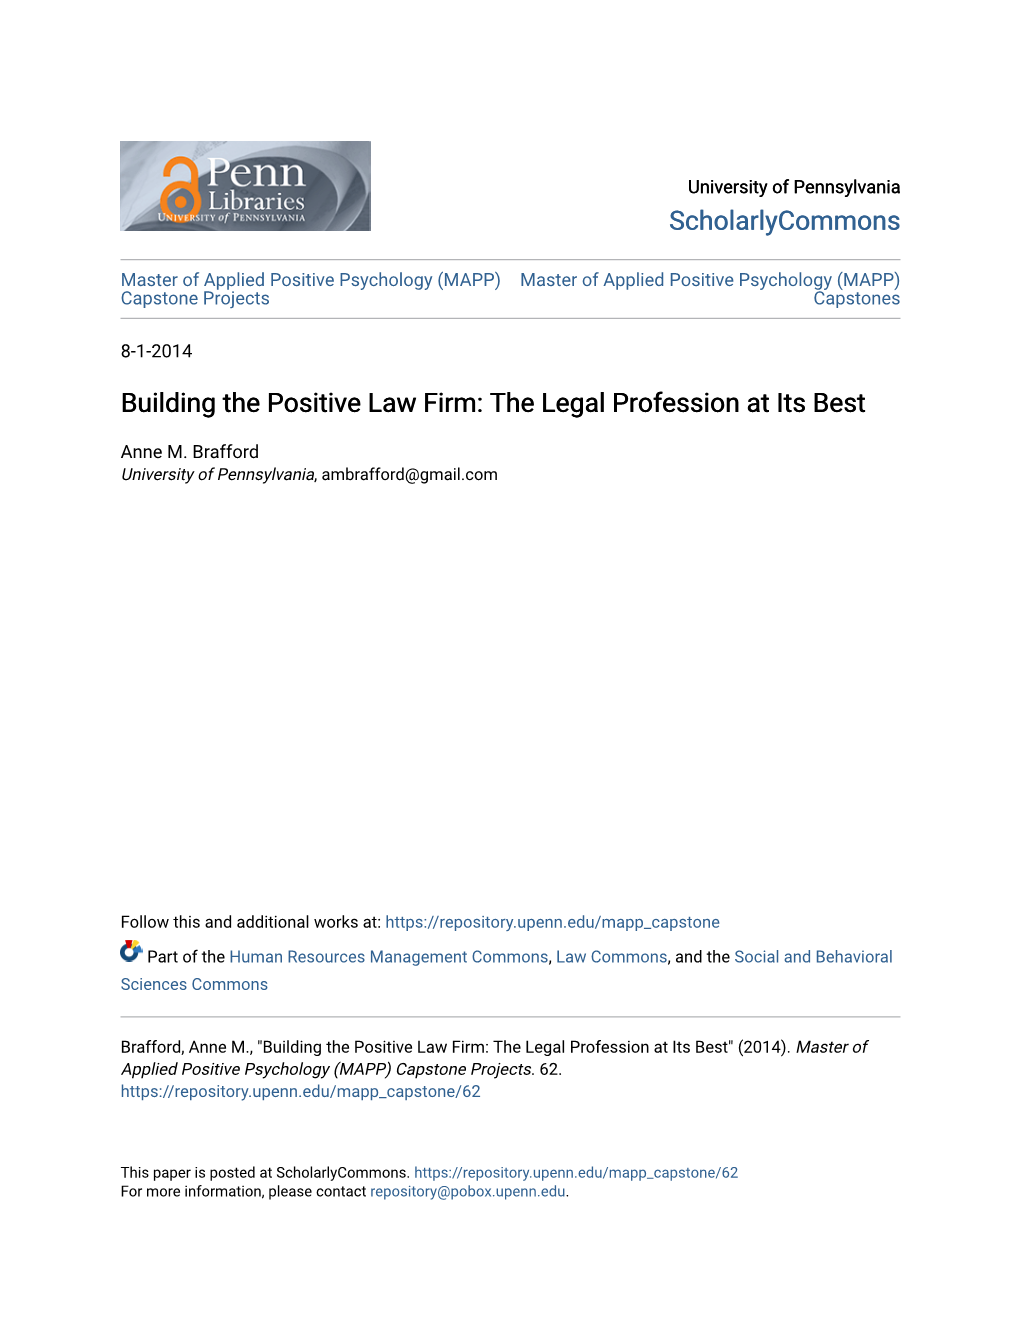 Building the Positive Law Firm: the Legal Profession at Its Best